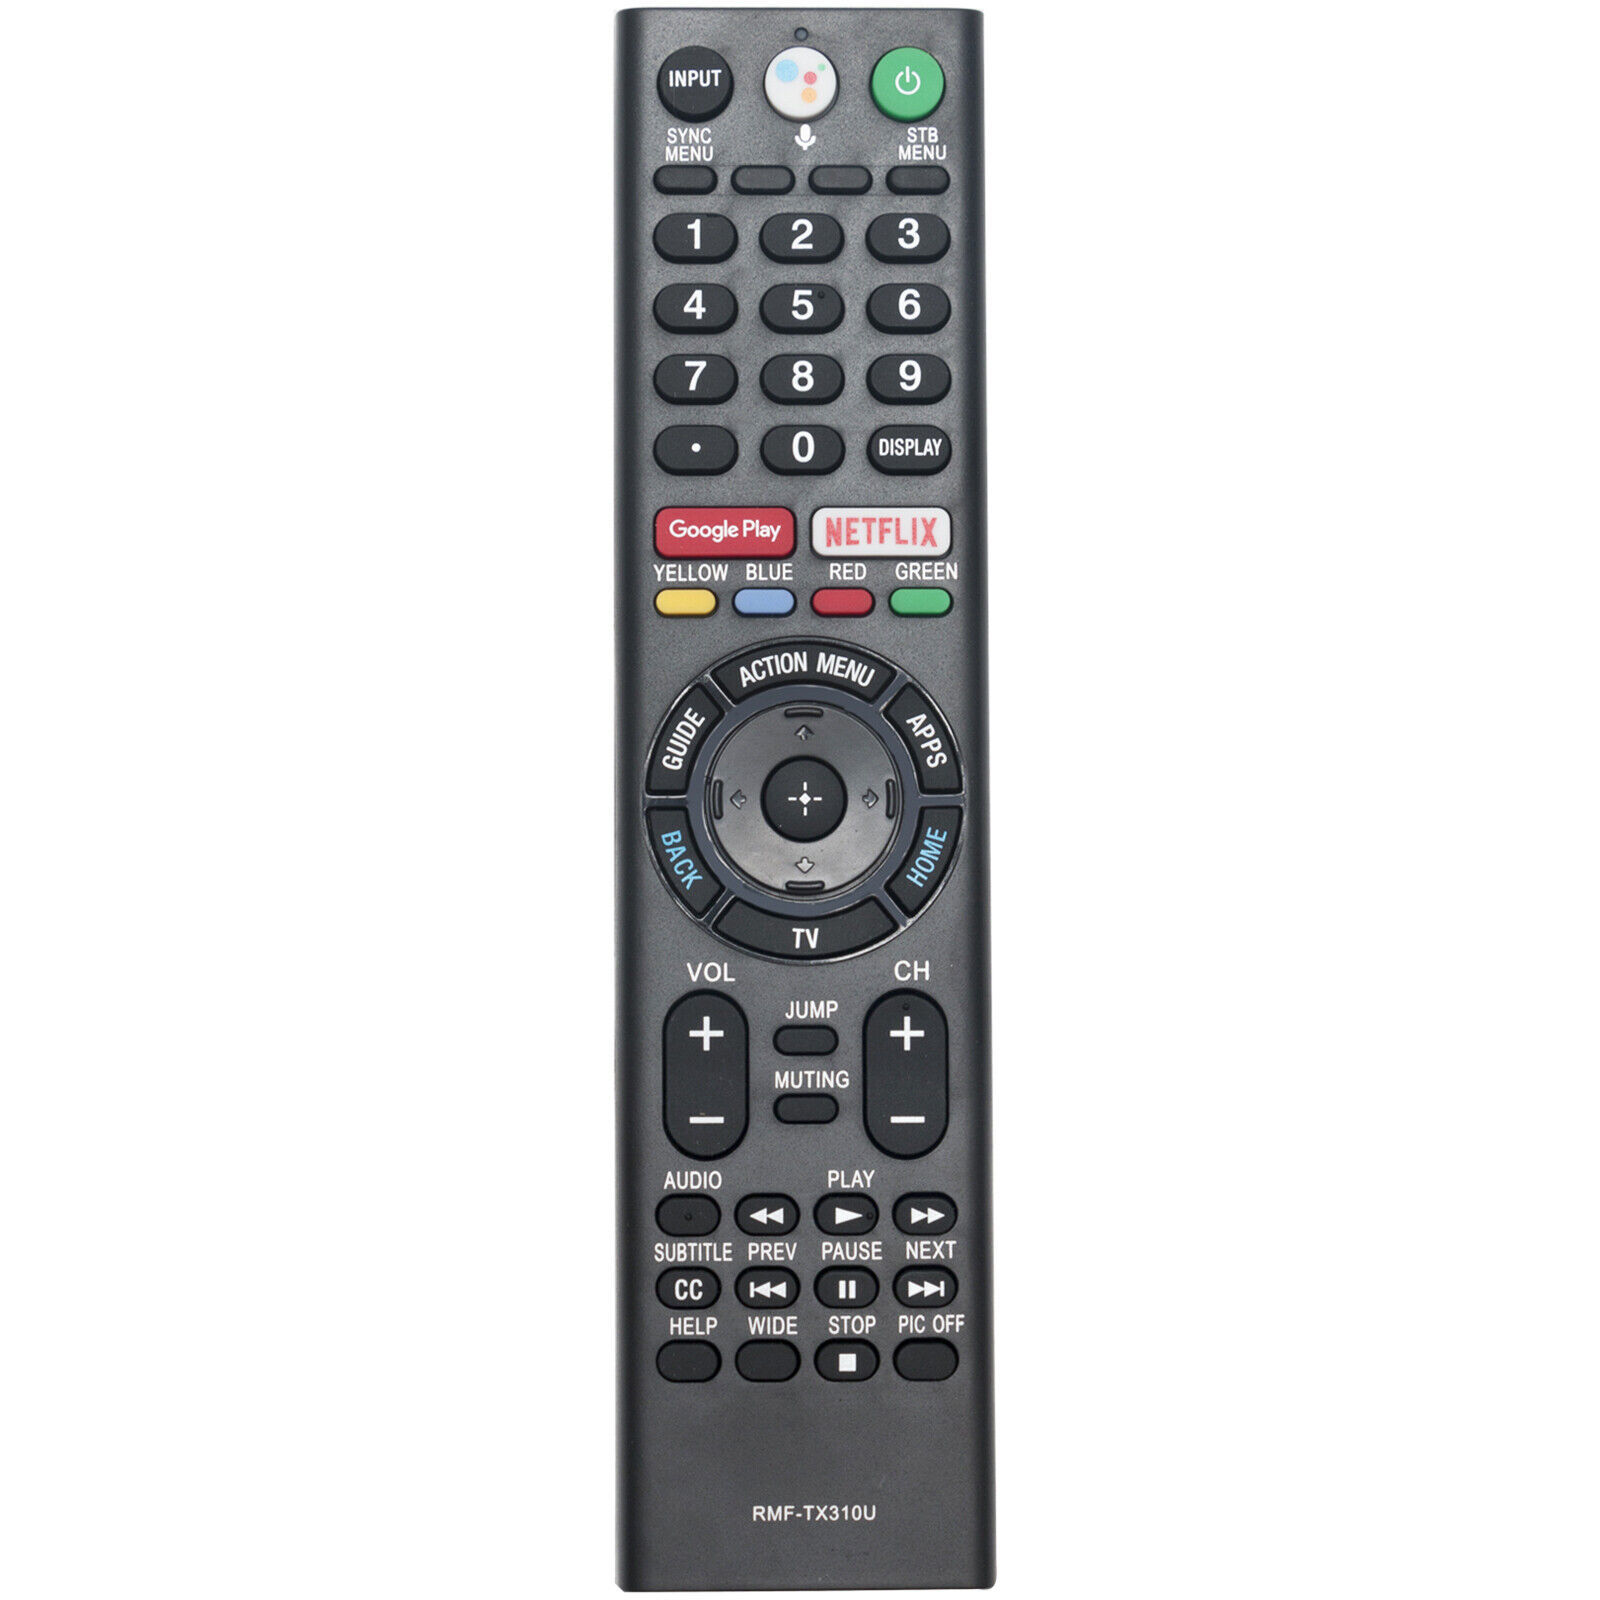 Primary image for New Rmf-Tx310U Voice Remote Sub Rmf-Tx220U For Sony Tv Xbr-65X850D Xbr-65X900F